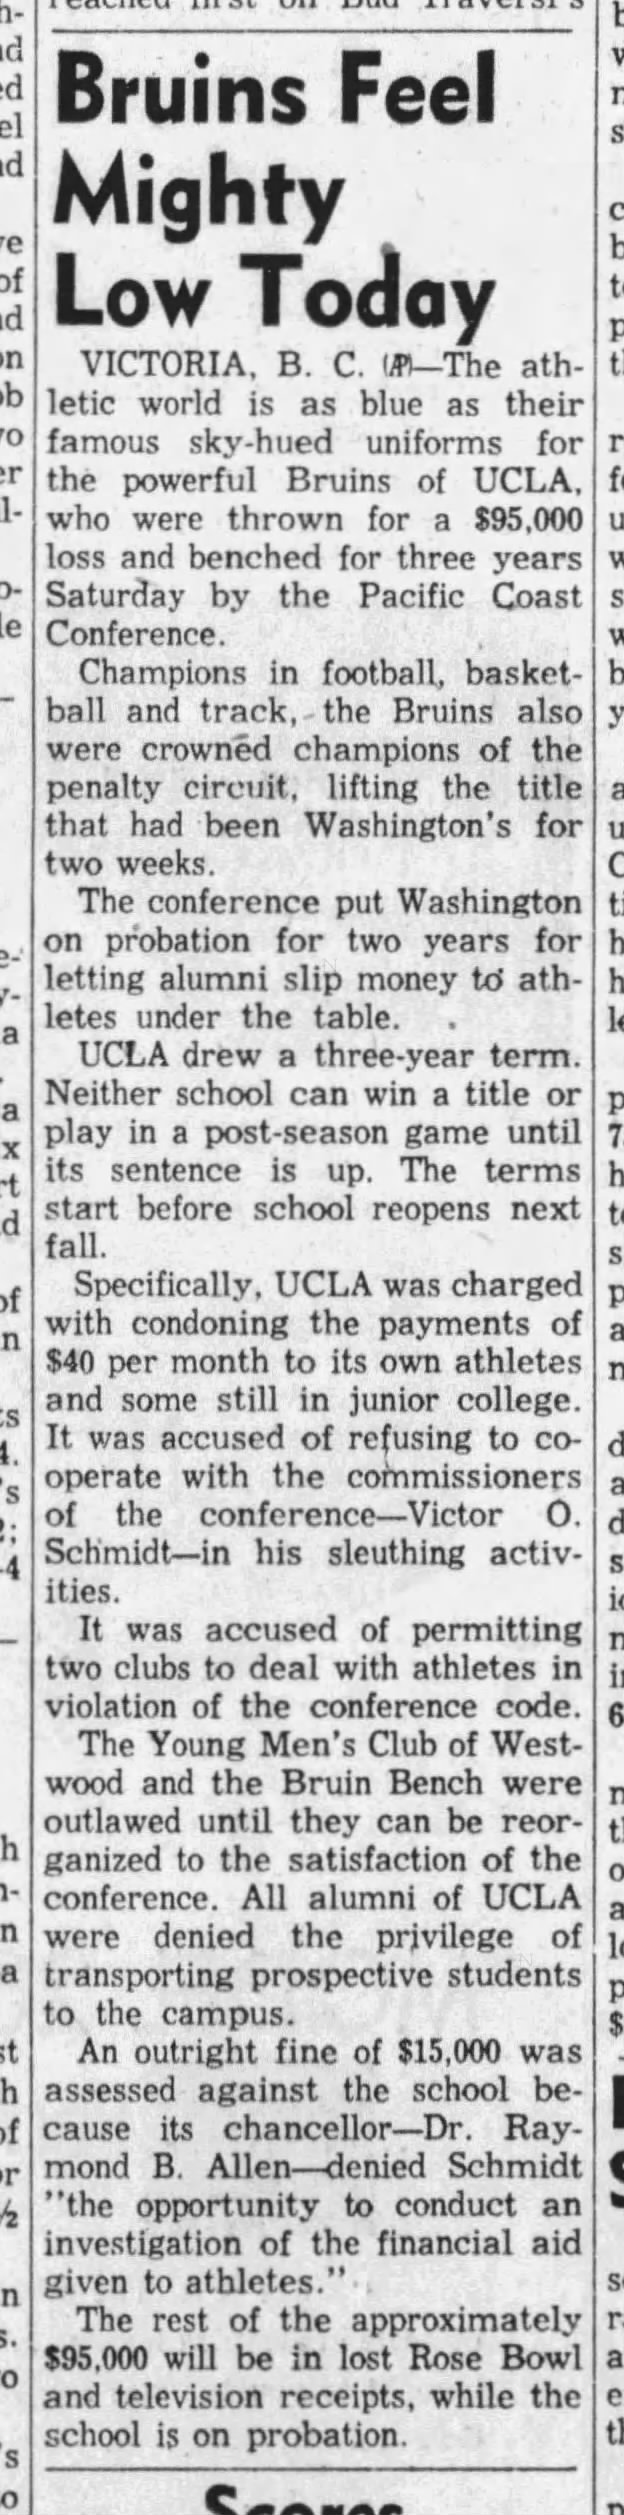 UCLA Penalized with 3 Year Probation, Sanctions by Pacific Coast Conference for Booster Payments